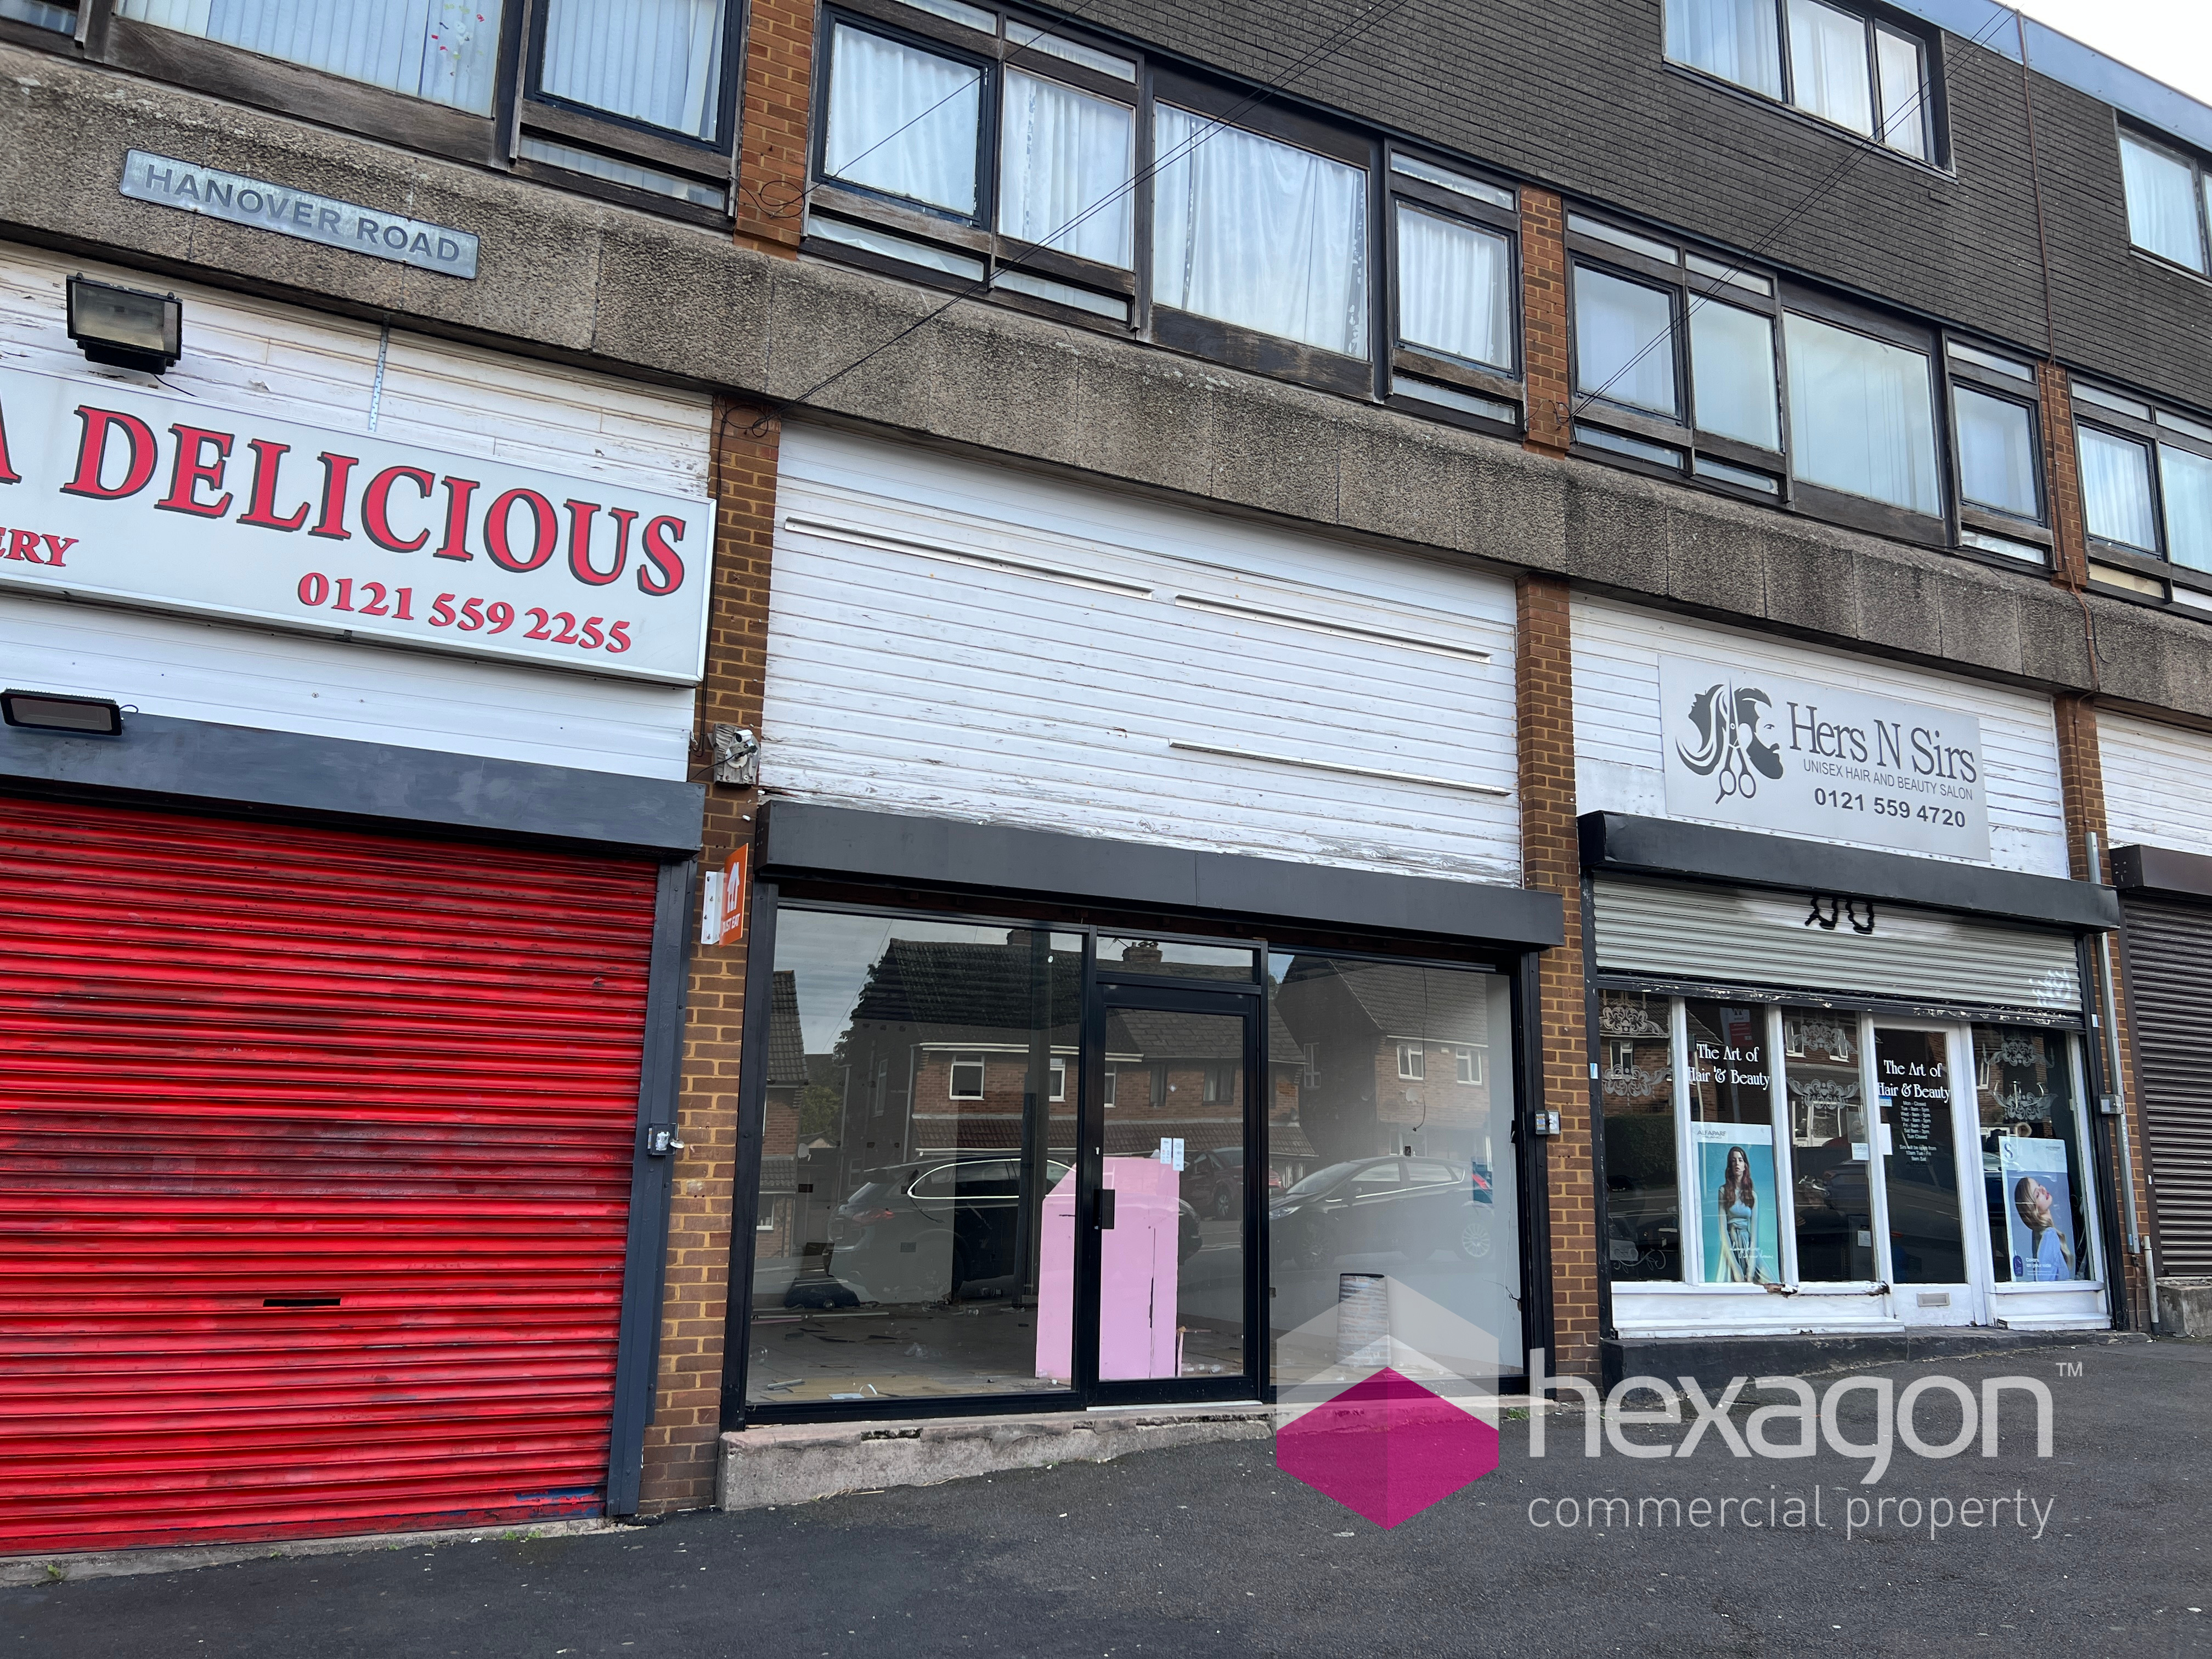 Retail Property (High Street) for rent in Rowley Regis. From Hexagon Commercial Property